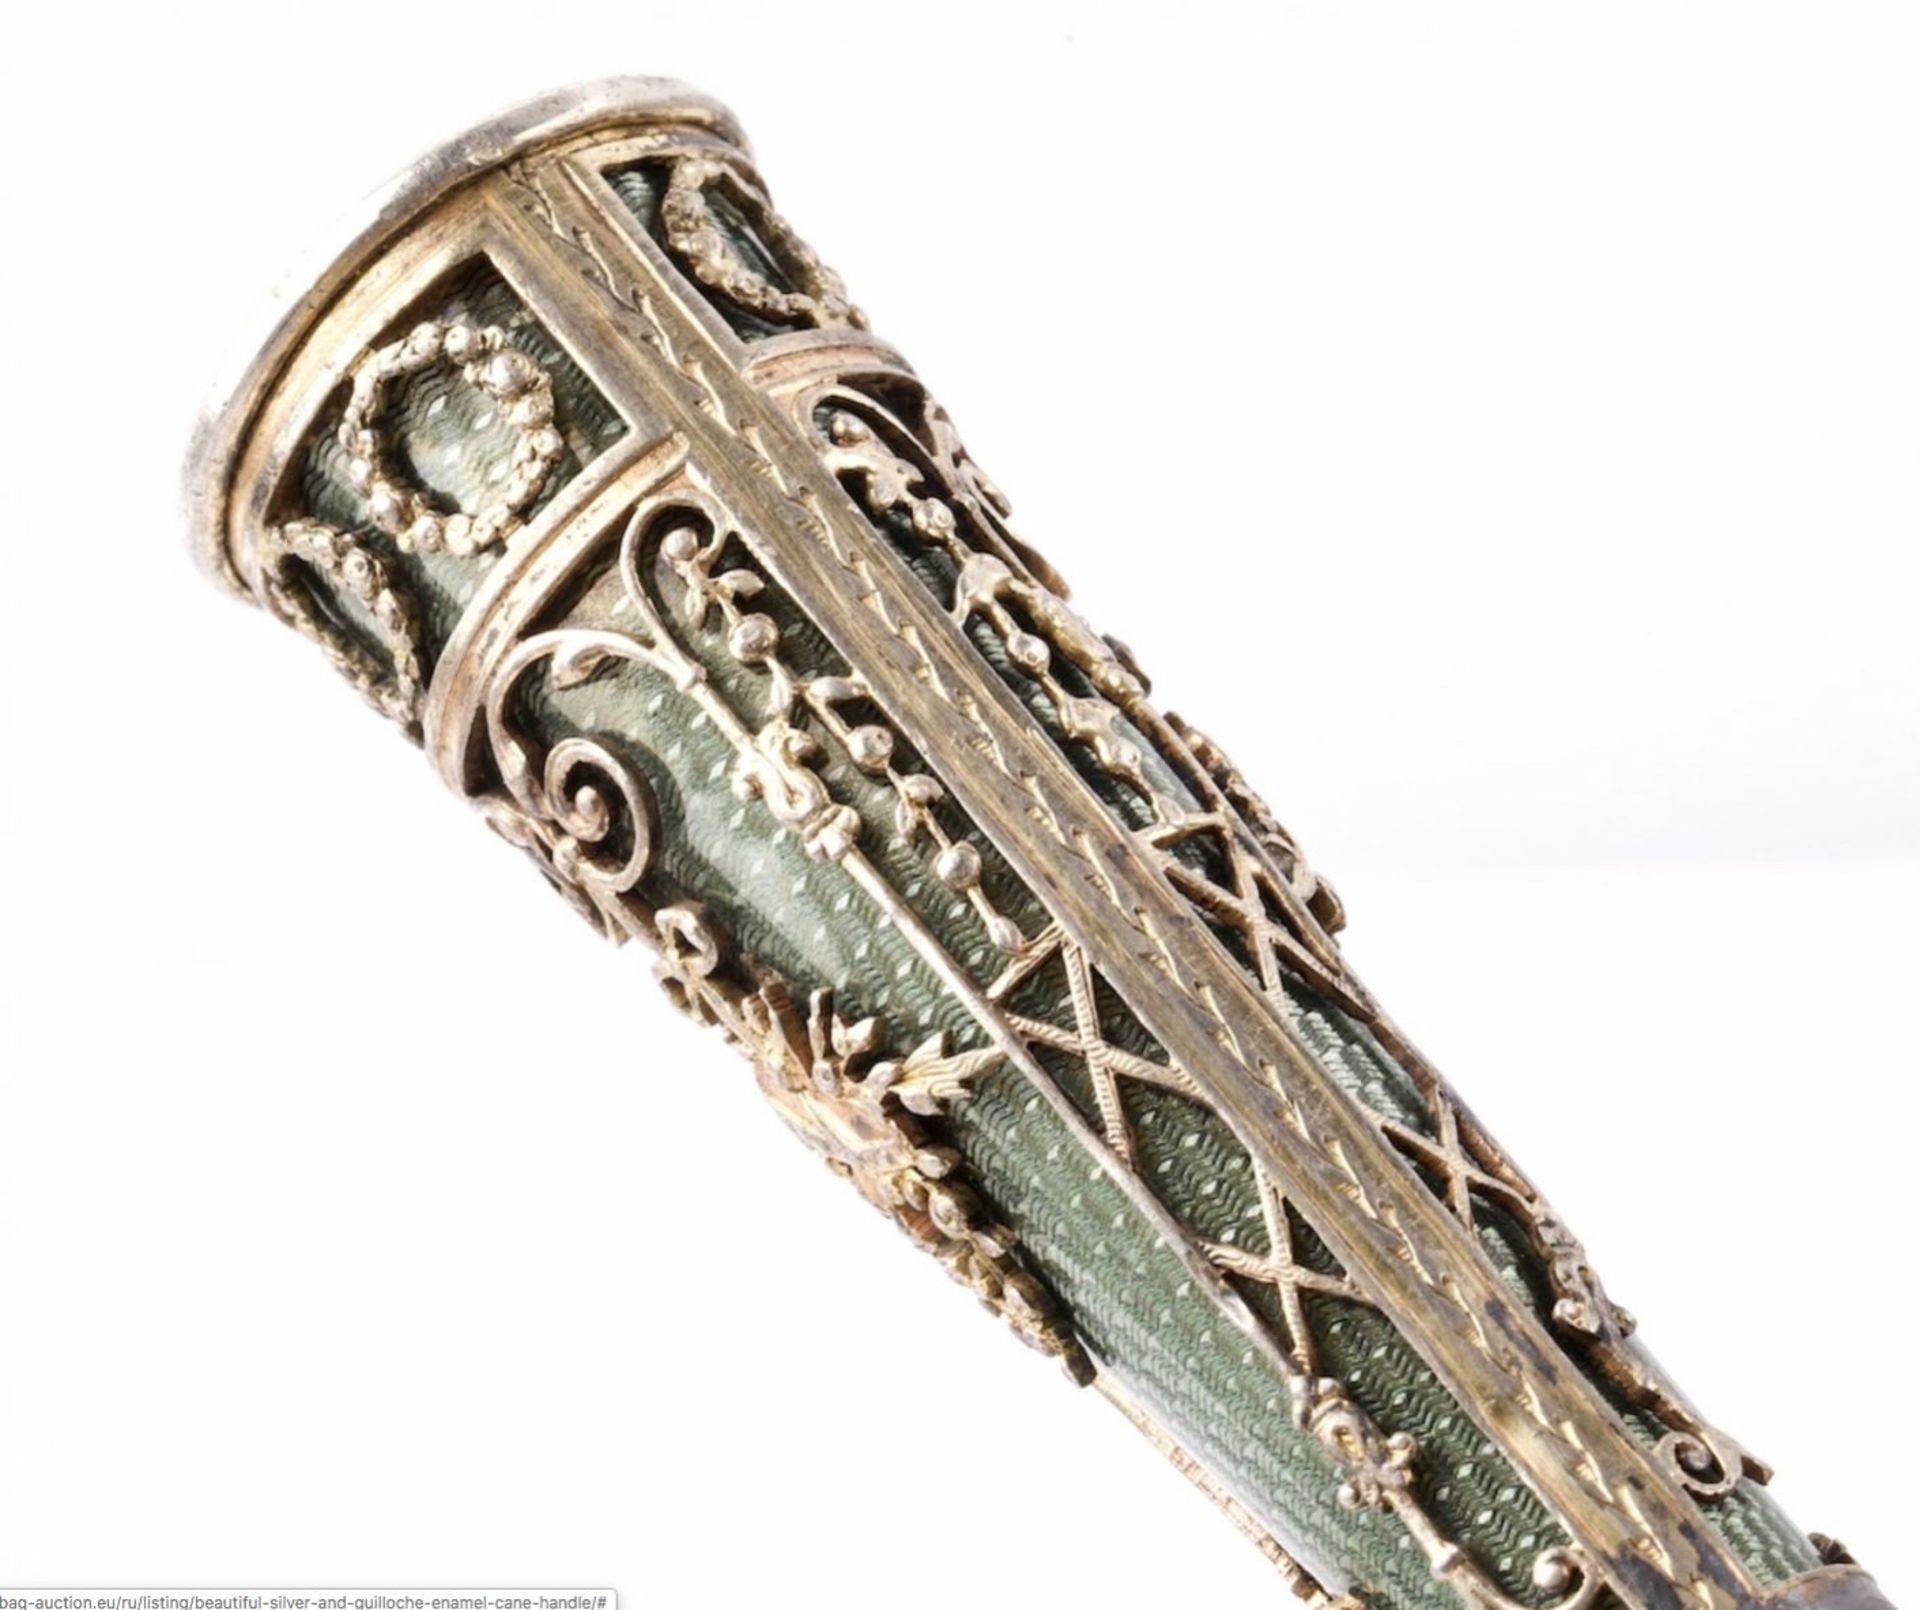 Cane with an Elegant tip - Image 5 of 5